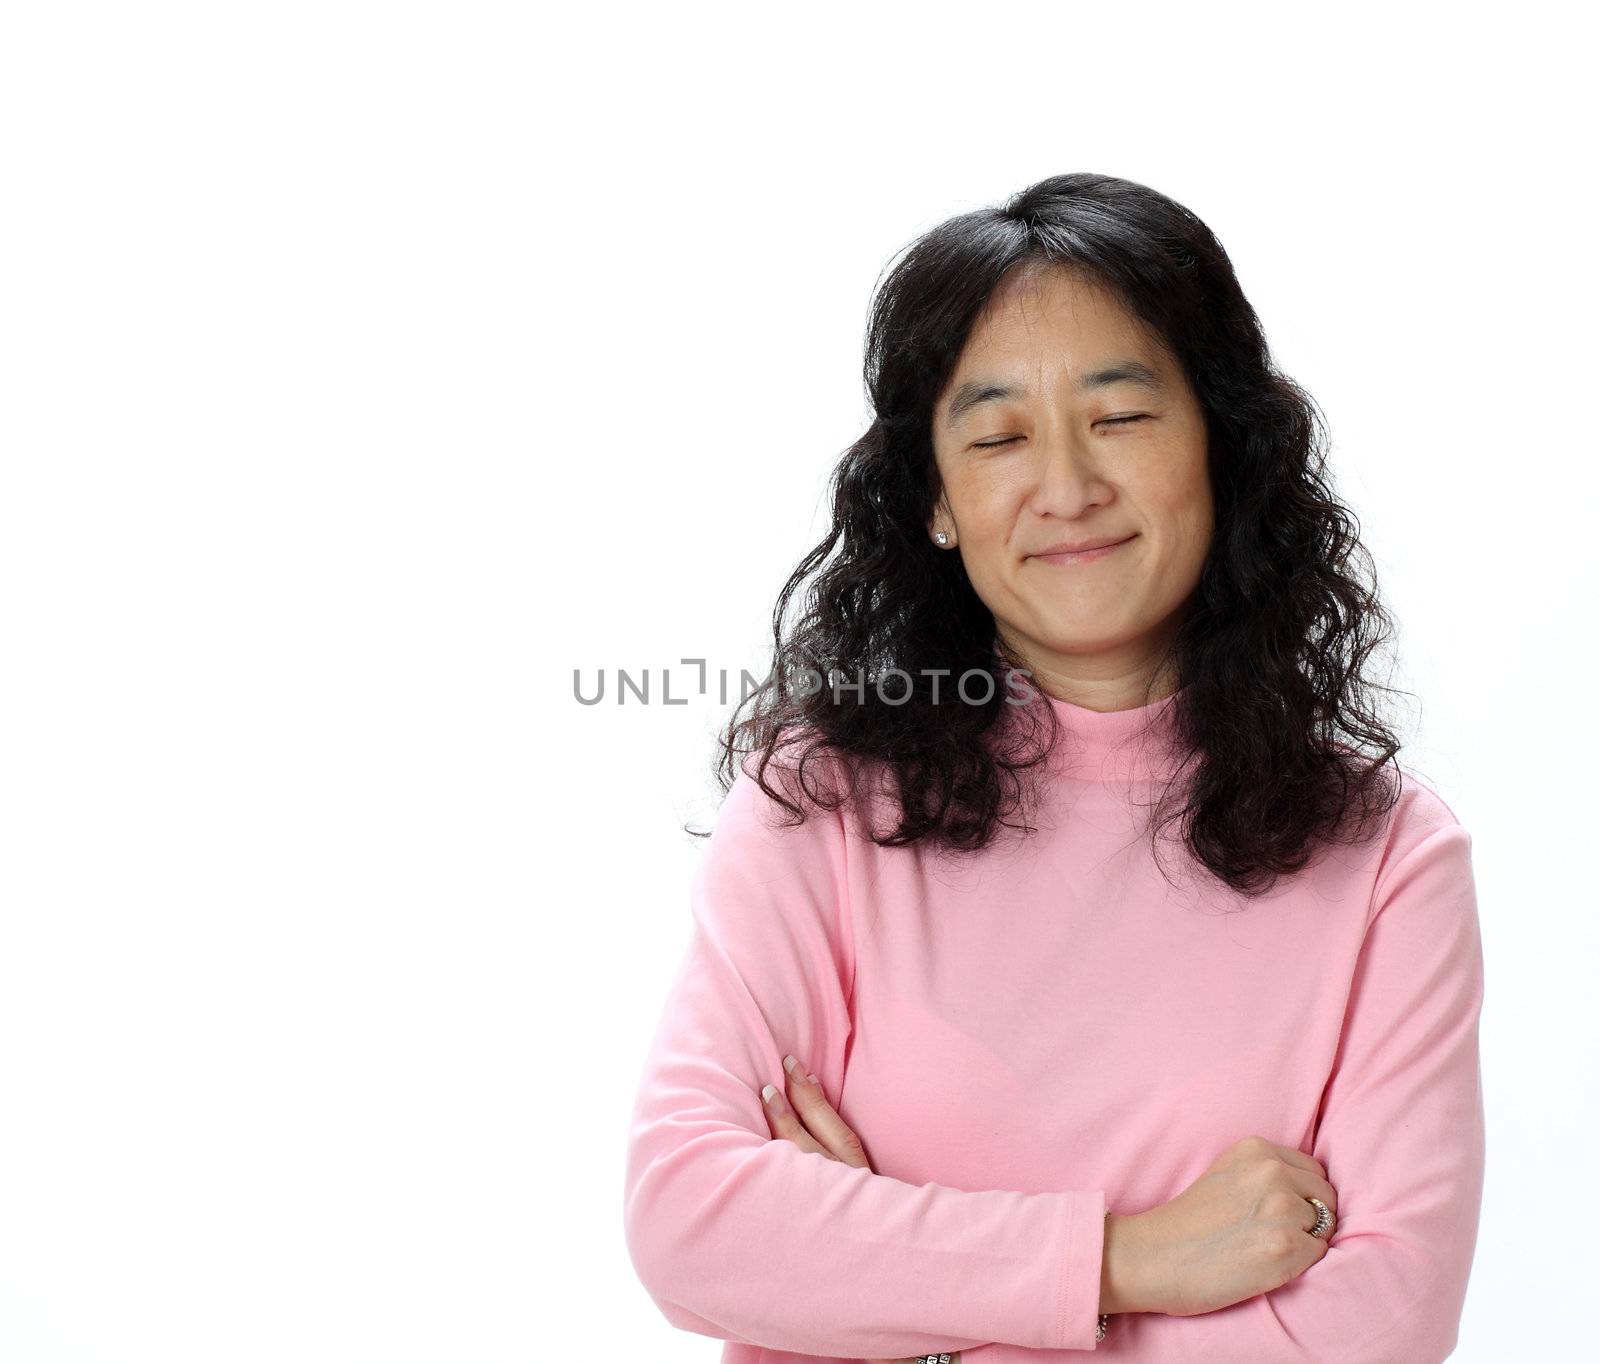 A Beautiful Asian woman Smiles While Thinking Happy Thoughts With Her Eyes Closed